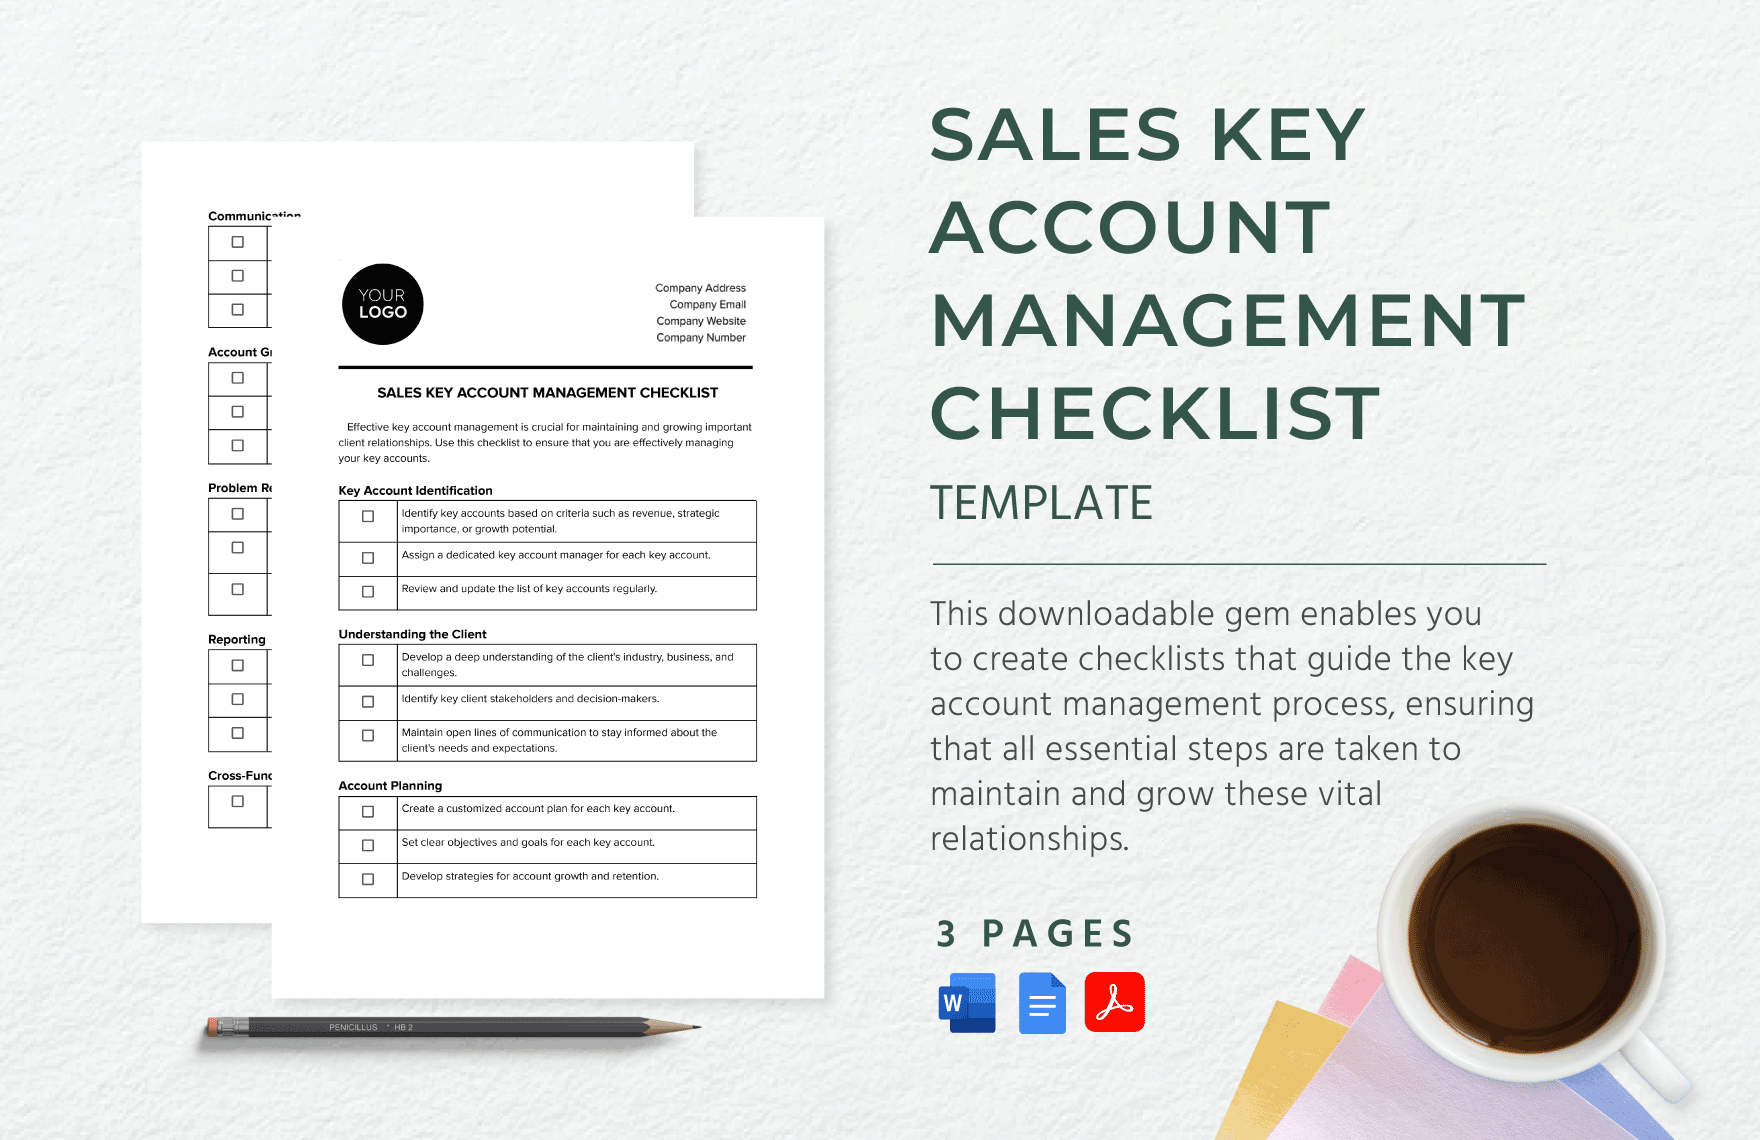 Sales Key Account Management Checklist Template in Word, Google Docs, PDF